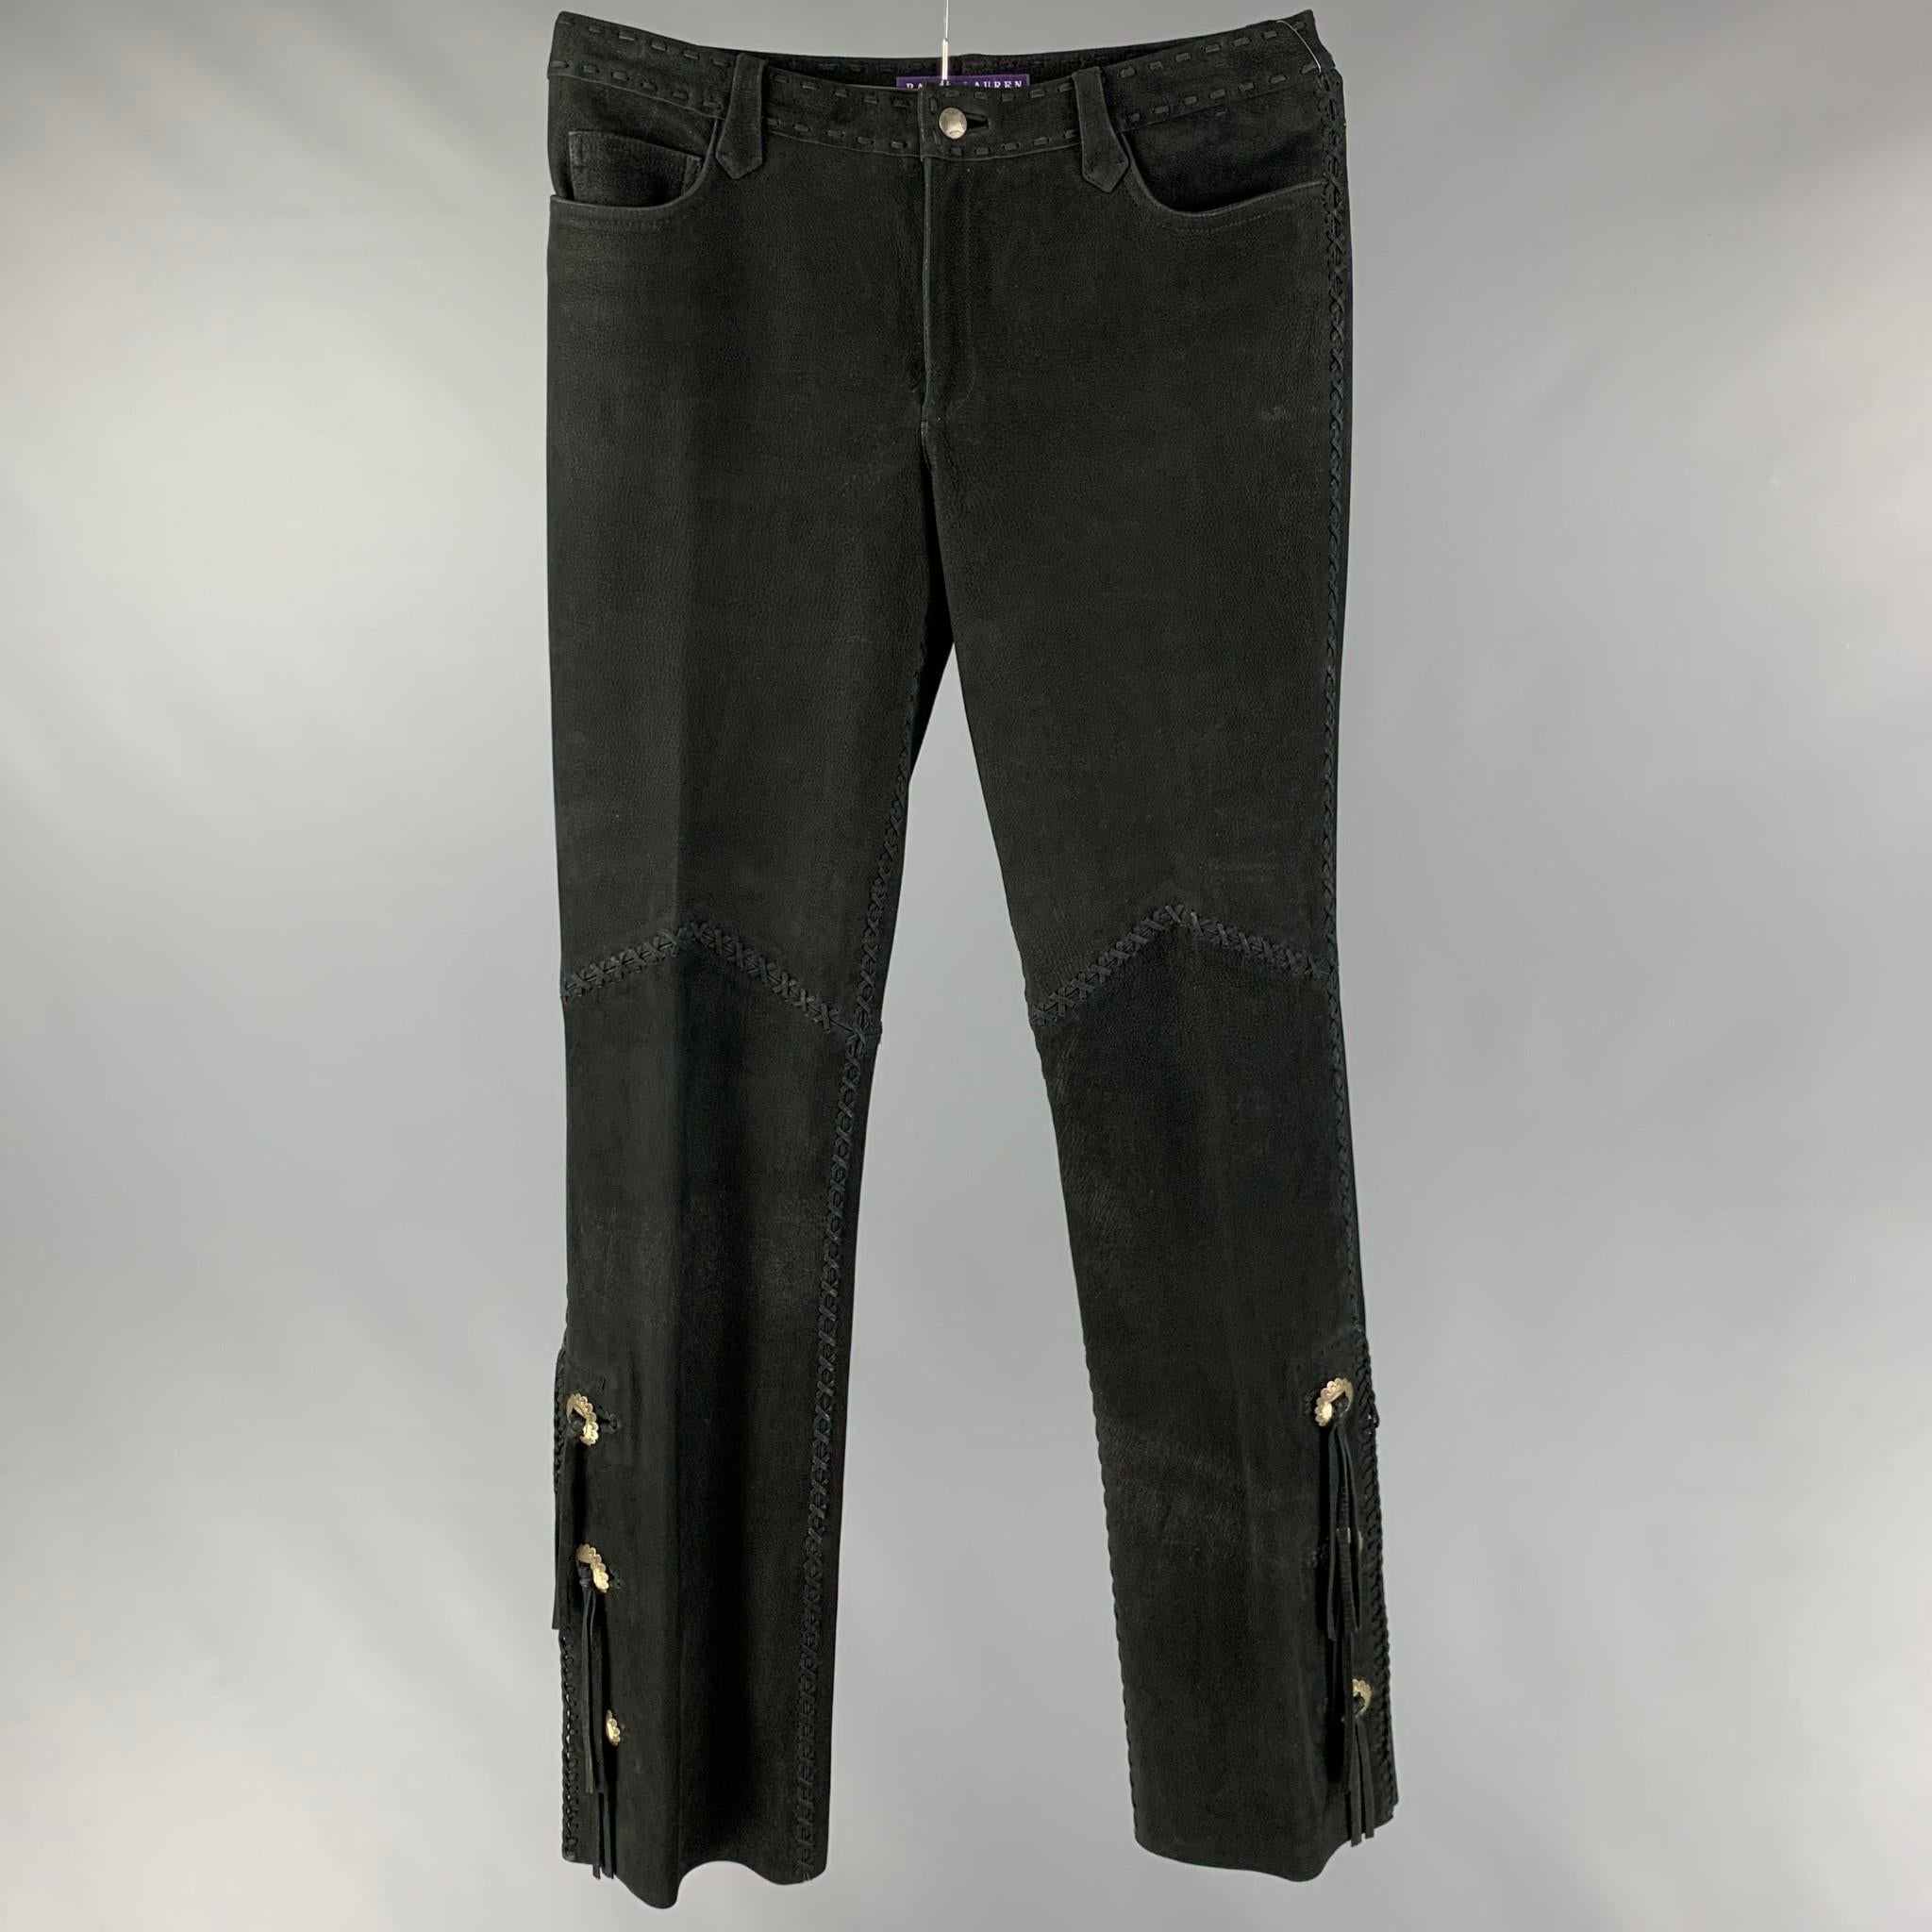 RALPH LAUREN COLLECTION by casual pants comes in a black suede featuring a western style, top stitching, concho detail, and a zip fly closure.

Excellent Pre-Owned Condition.
Marked: no size marked

Measurements:

Waist: 34 in.
Rise: 10 in.
Inseam: